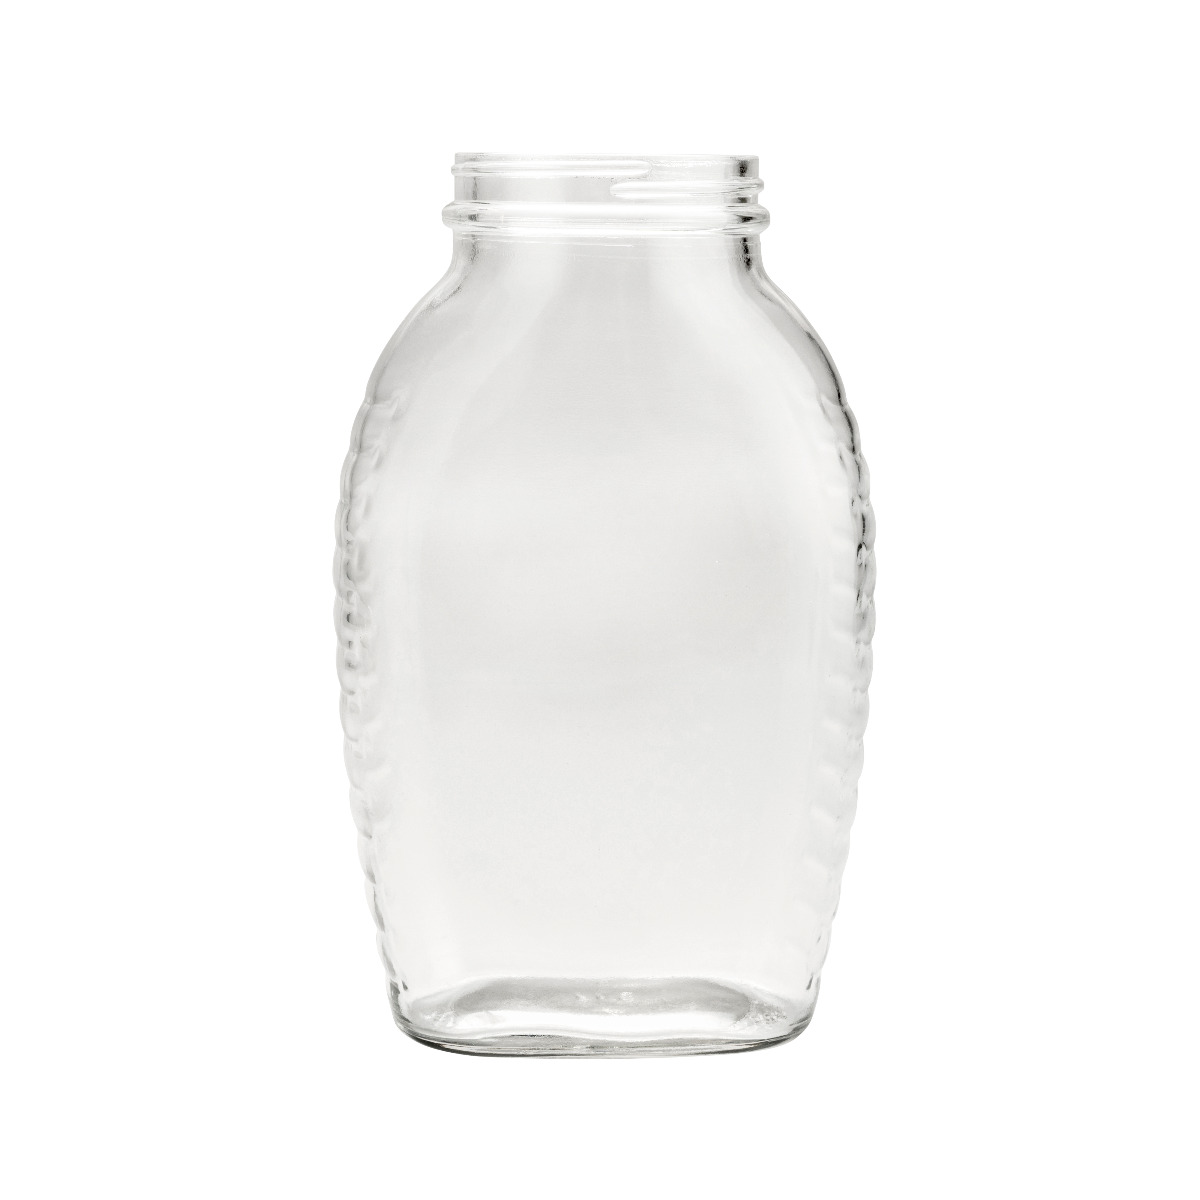 Wide glass container